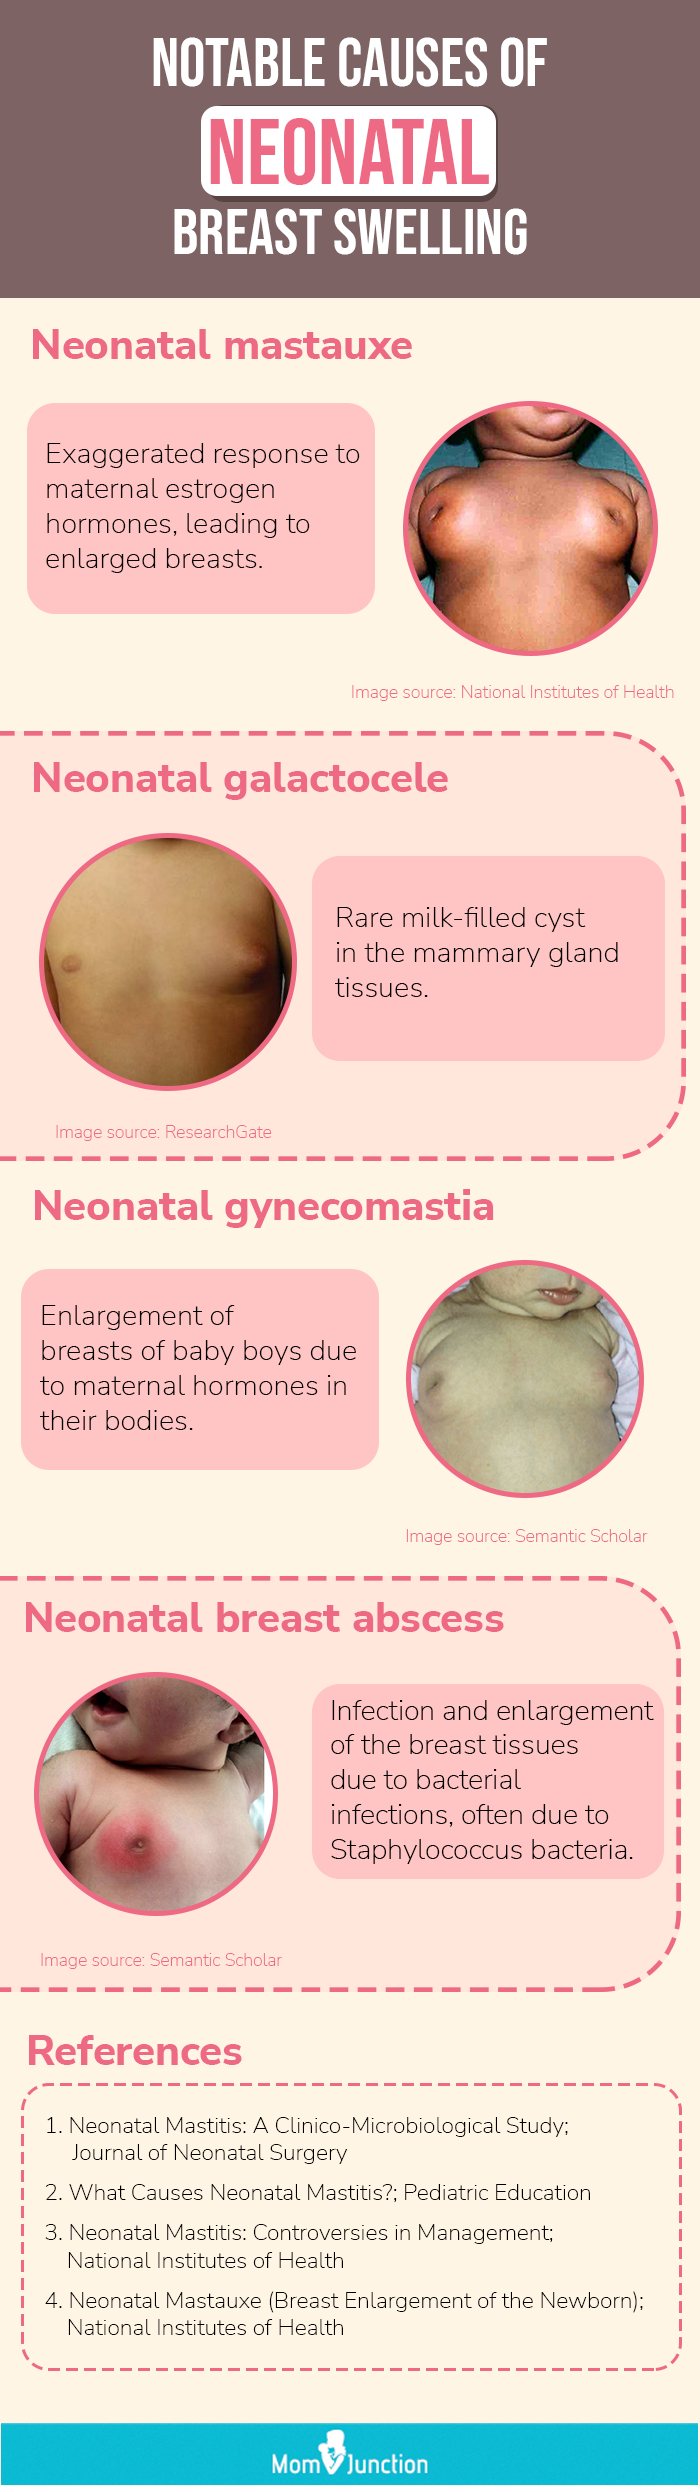 causes of breast swelling ln babies (infographic)